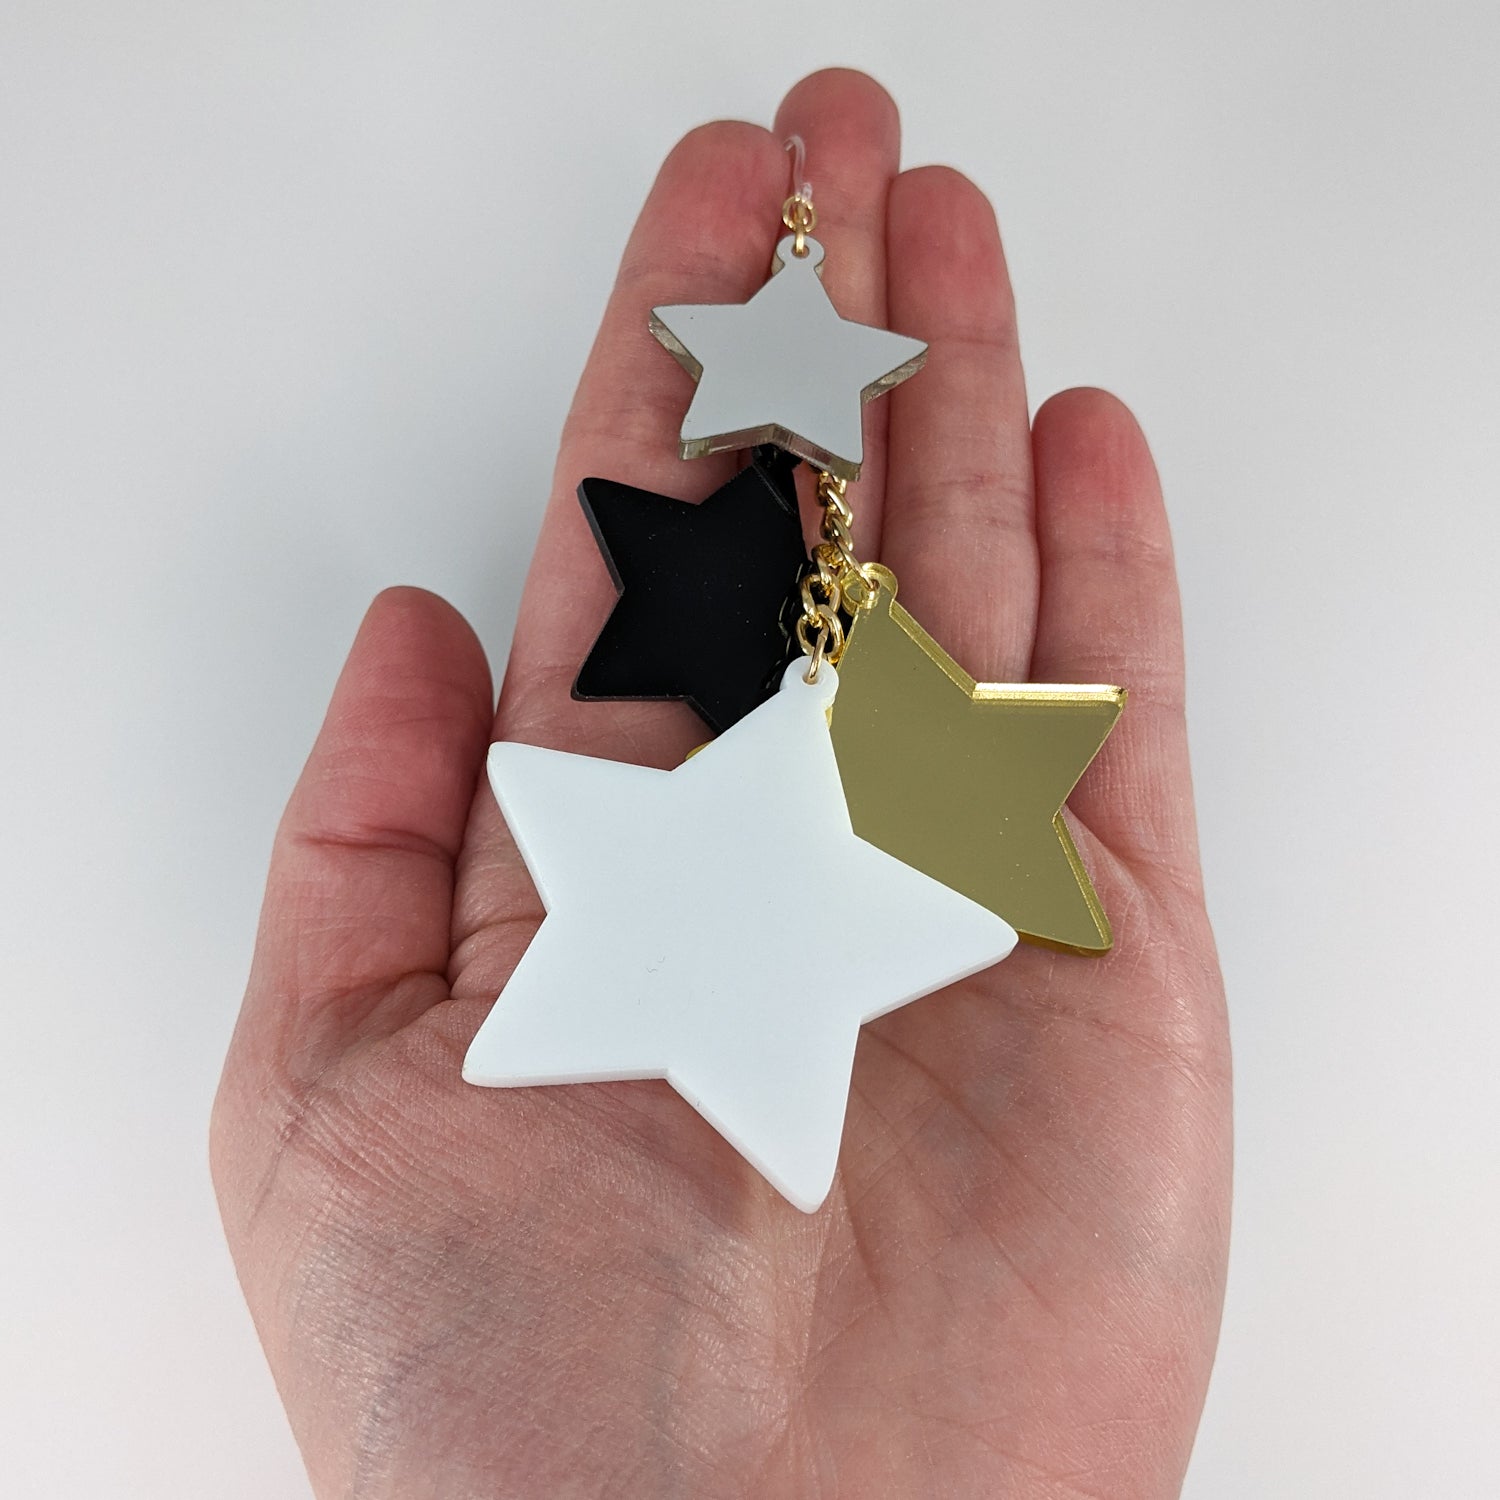 Exaggerated Stars Earrings (Dangles) - size comparison hand